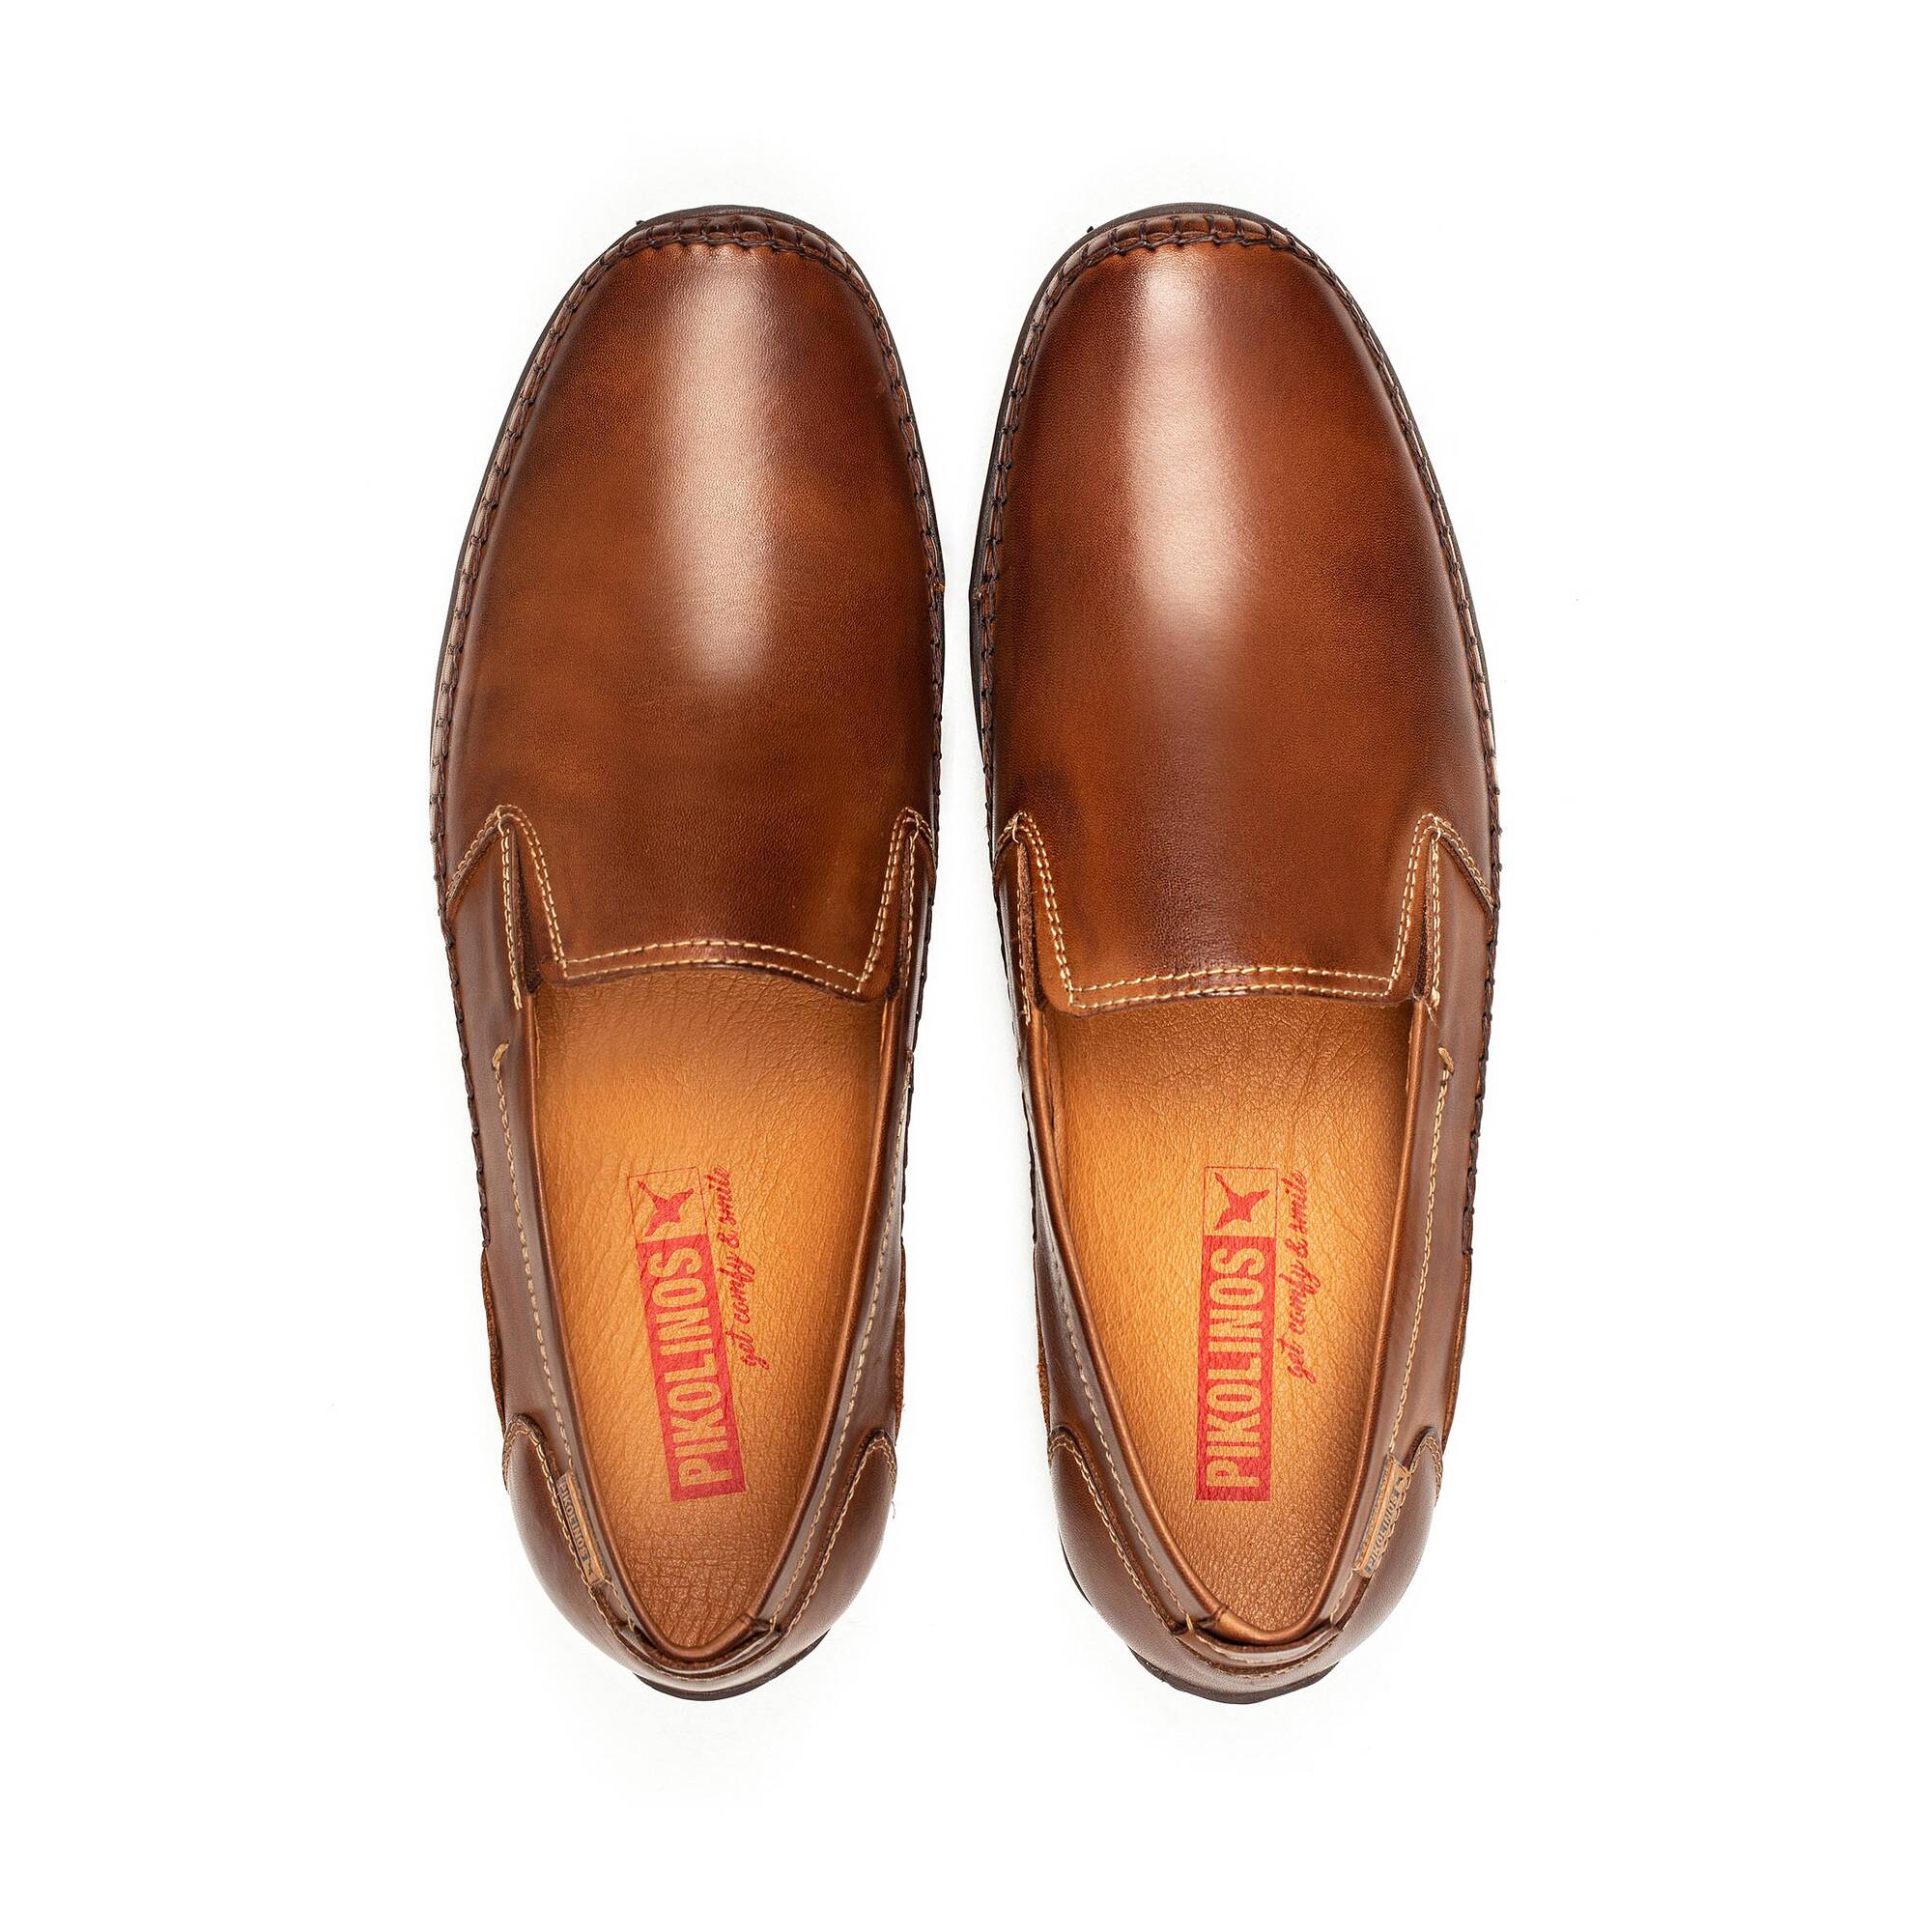 'Azores' men's loafer - Pikolinos - Chaplinshoes'Azores' men's loafer - PikolinosPikolinos